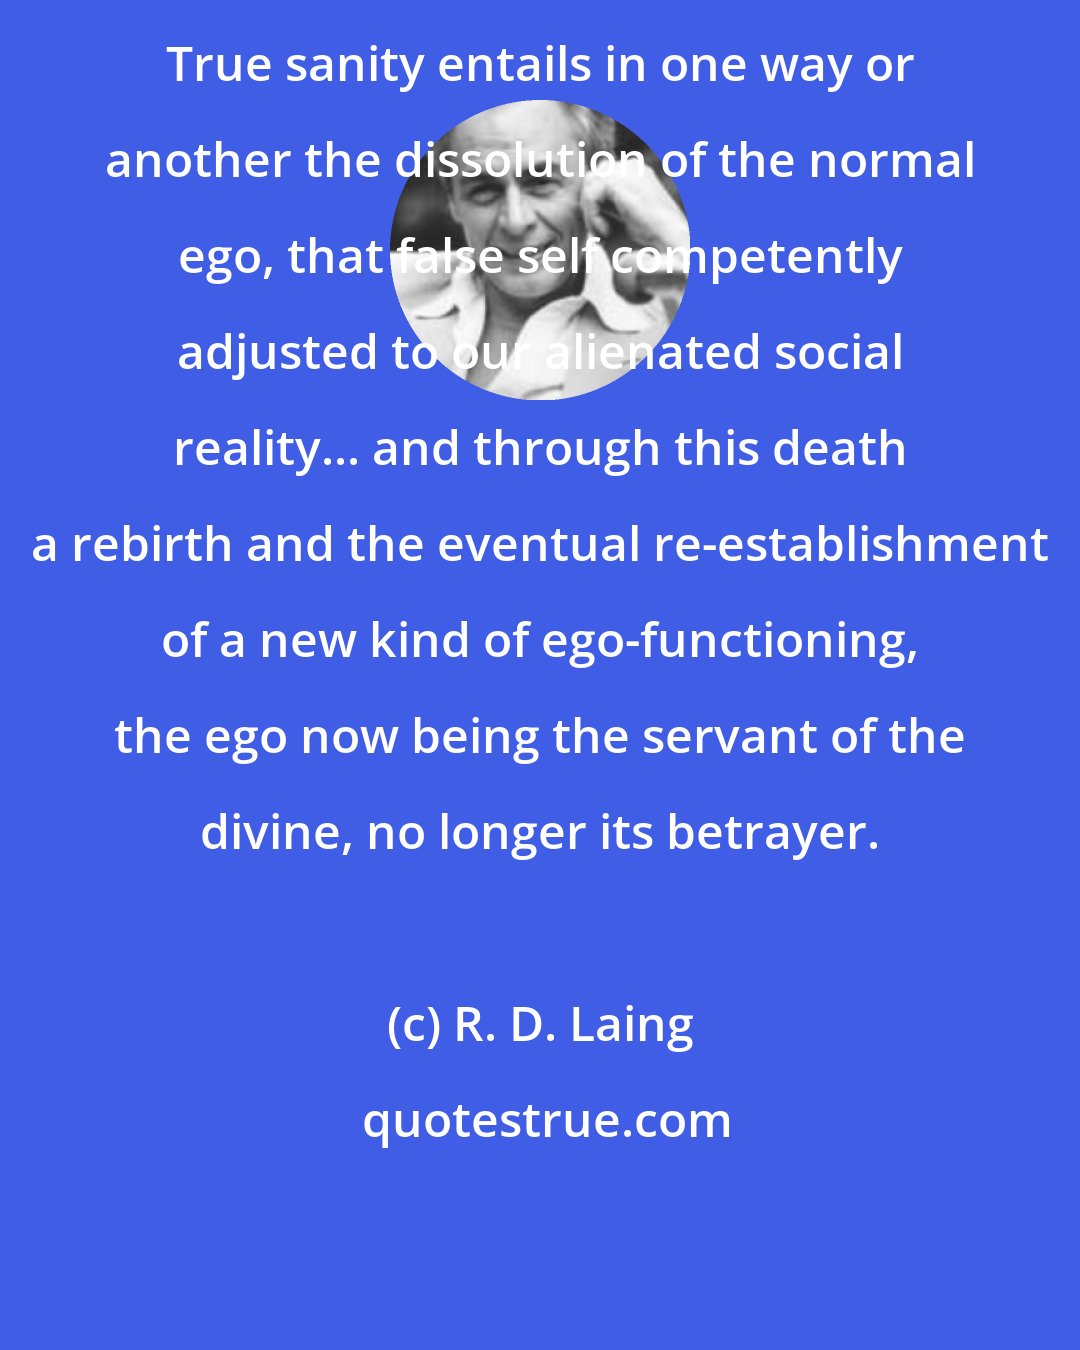 R. D. Laing: True sanity entails in one way or another the dissolution of the normal ego, that false self competently adjusted to our alienated social reality... and through this death a rebirth and the eventual re-establishment of a new kind of ego-functioning, the ego now being the servant of the divine, no longer its betrayer.